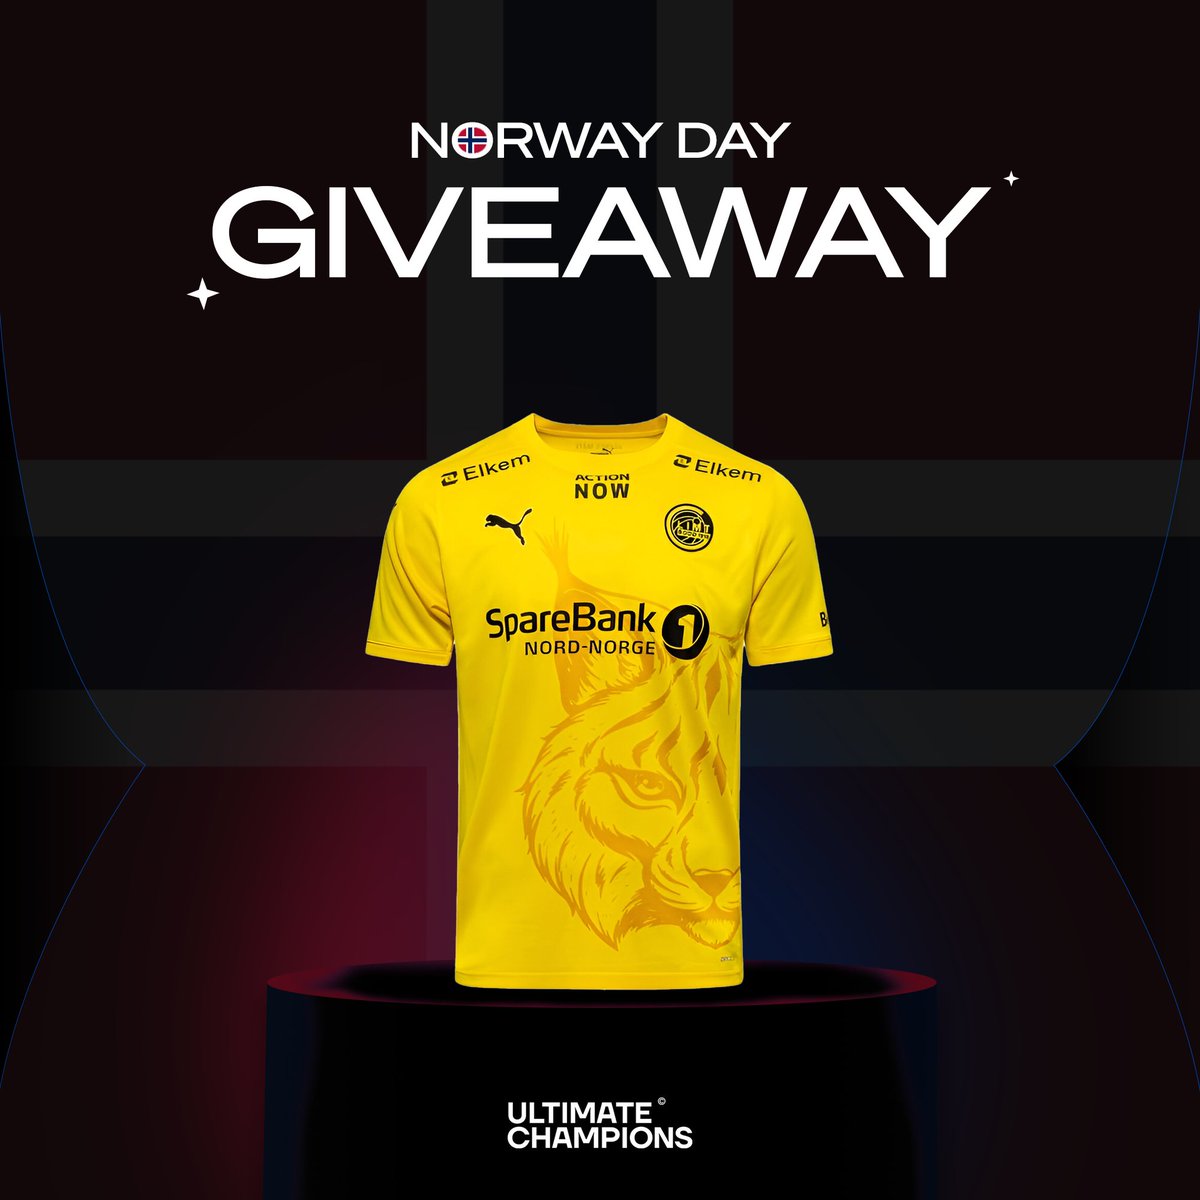 🇳🇴⚽ Happy National Football Day, Norway! ⚽🎉 As the proud home of @eliteserien, we're adding more excitement with an @Glimt Signed Shirt Giveaway! Follow these steps to enter: 1⃣ Like & RT 2⃣ Comment your prediction for the combined goals in today's 8 Eliteserien fixtures &